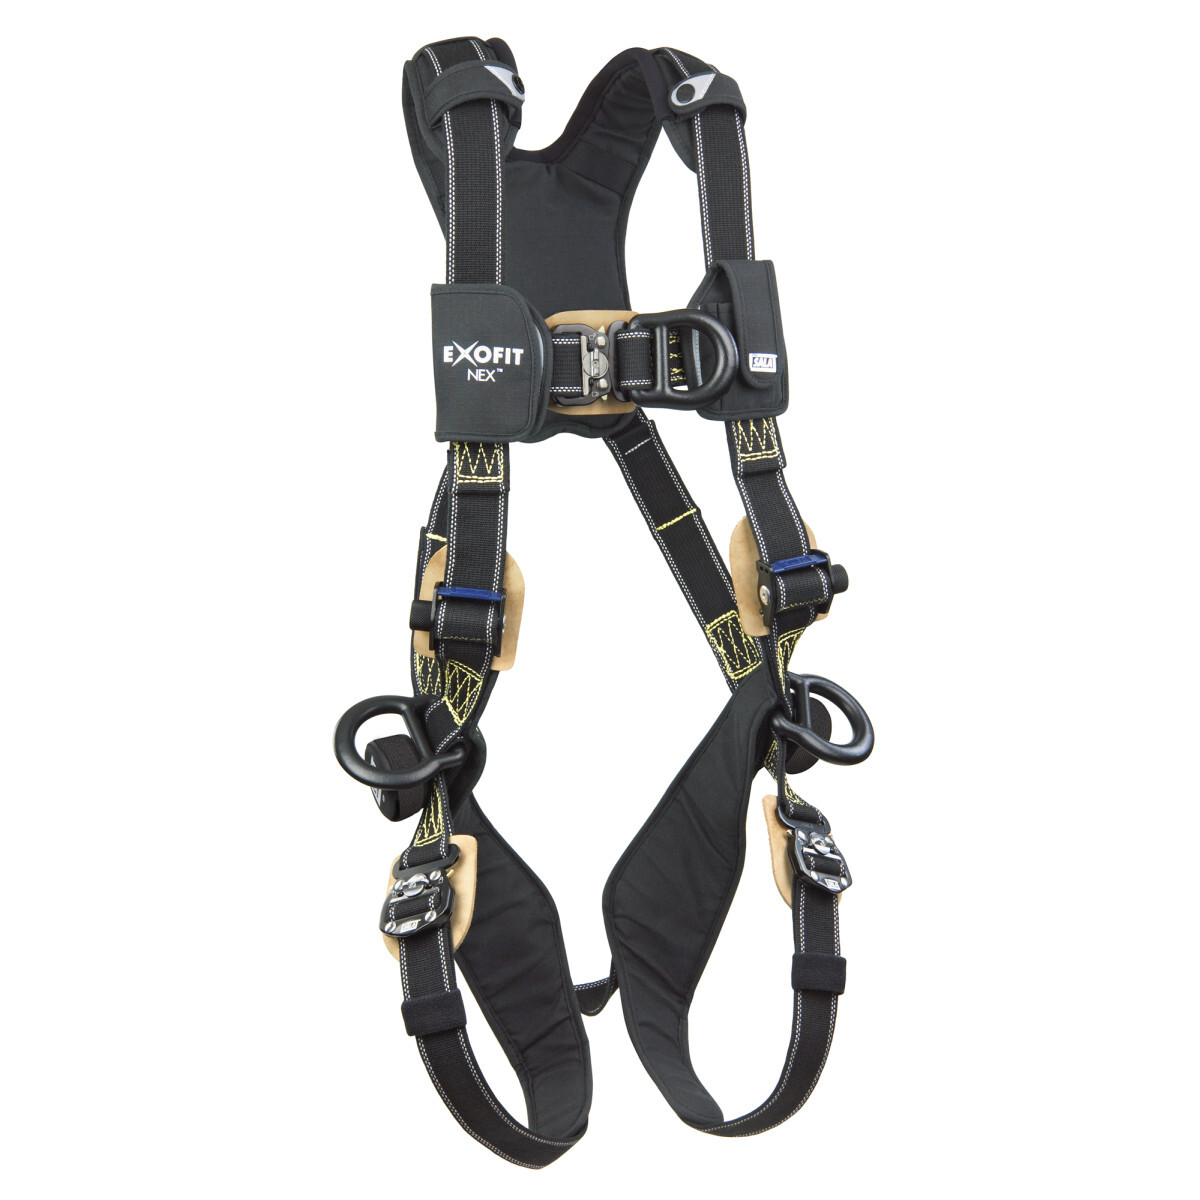 3M™ DBI-SALA® Small ExoFit NEX™ Arc Flash Full Body/Vest Style Harness With Front, Back And Side D-Ring, Locking Quick Connect C